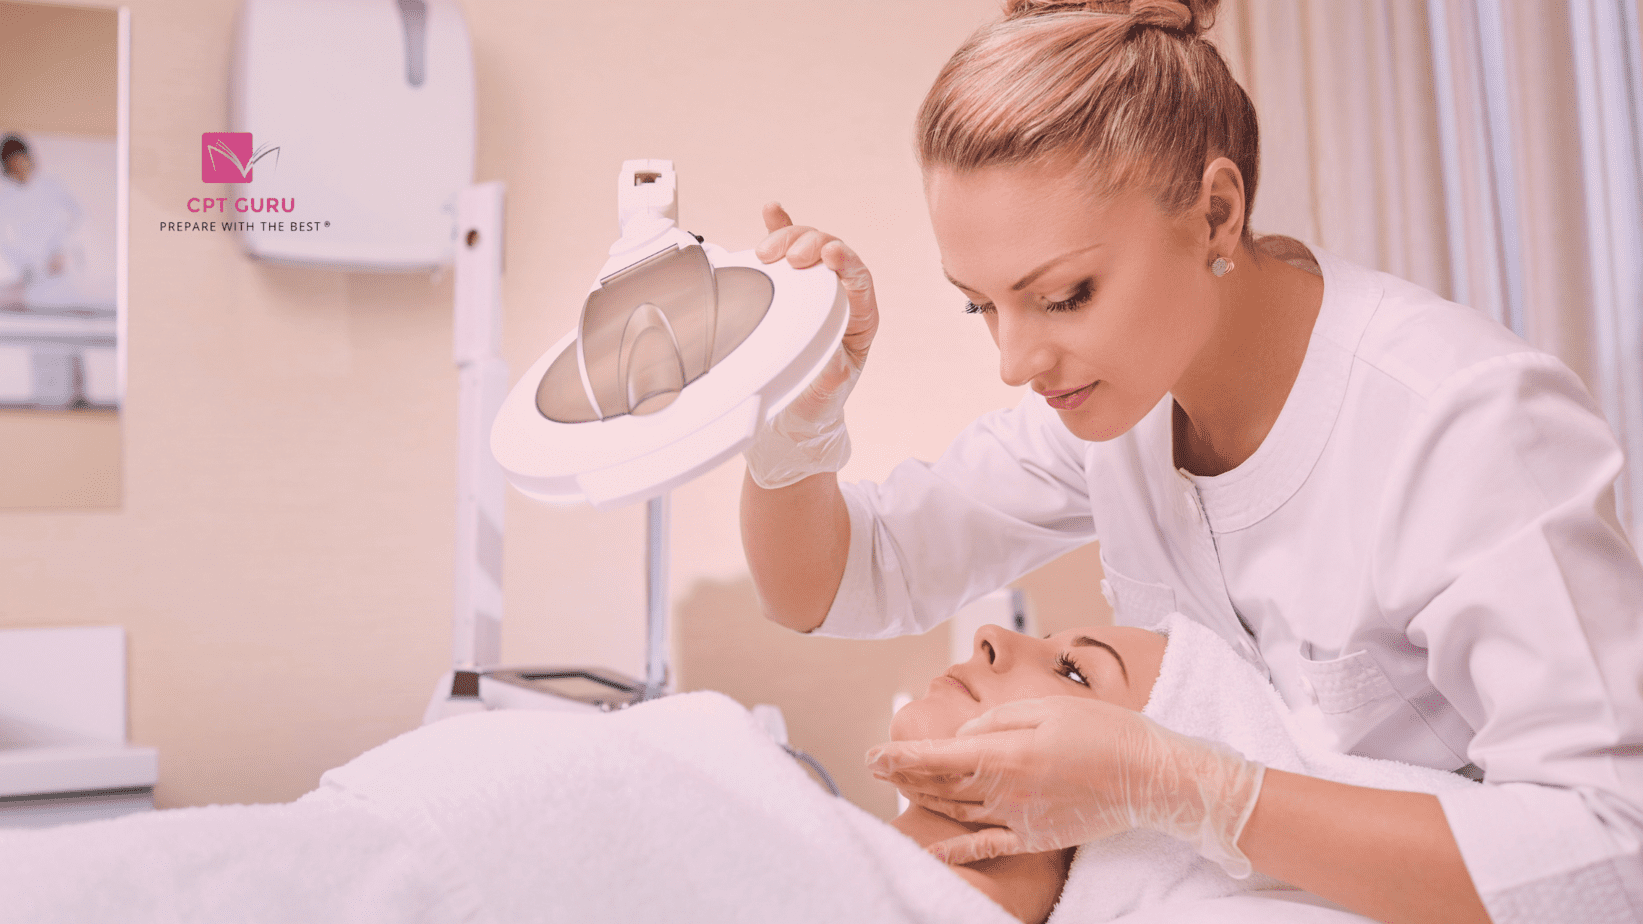 Life after cosmetology school: how to start your career as a newly licensed cosmetologist